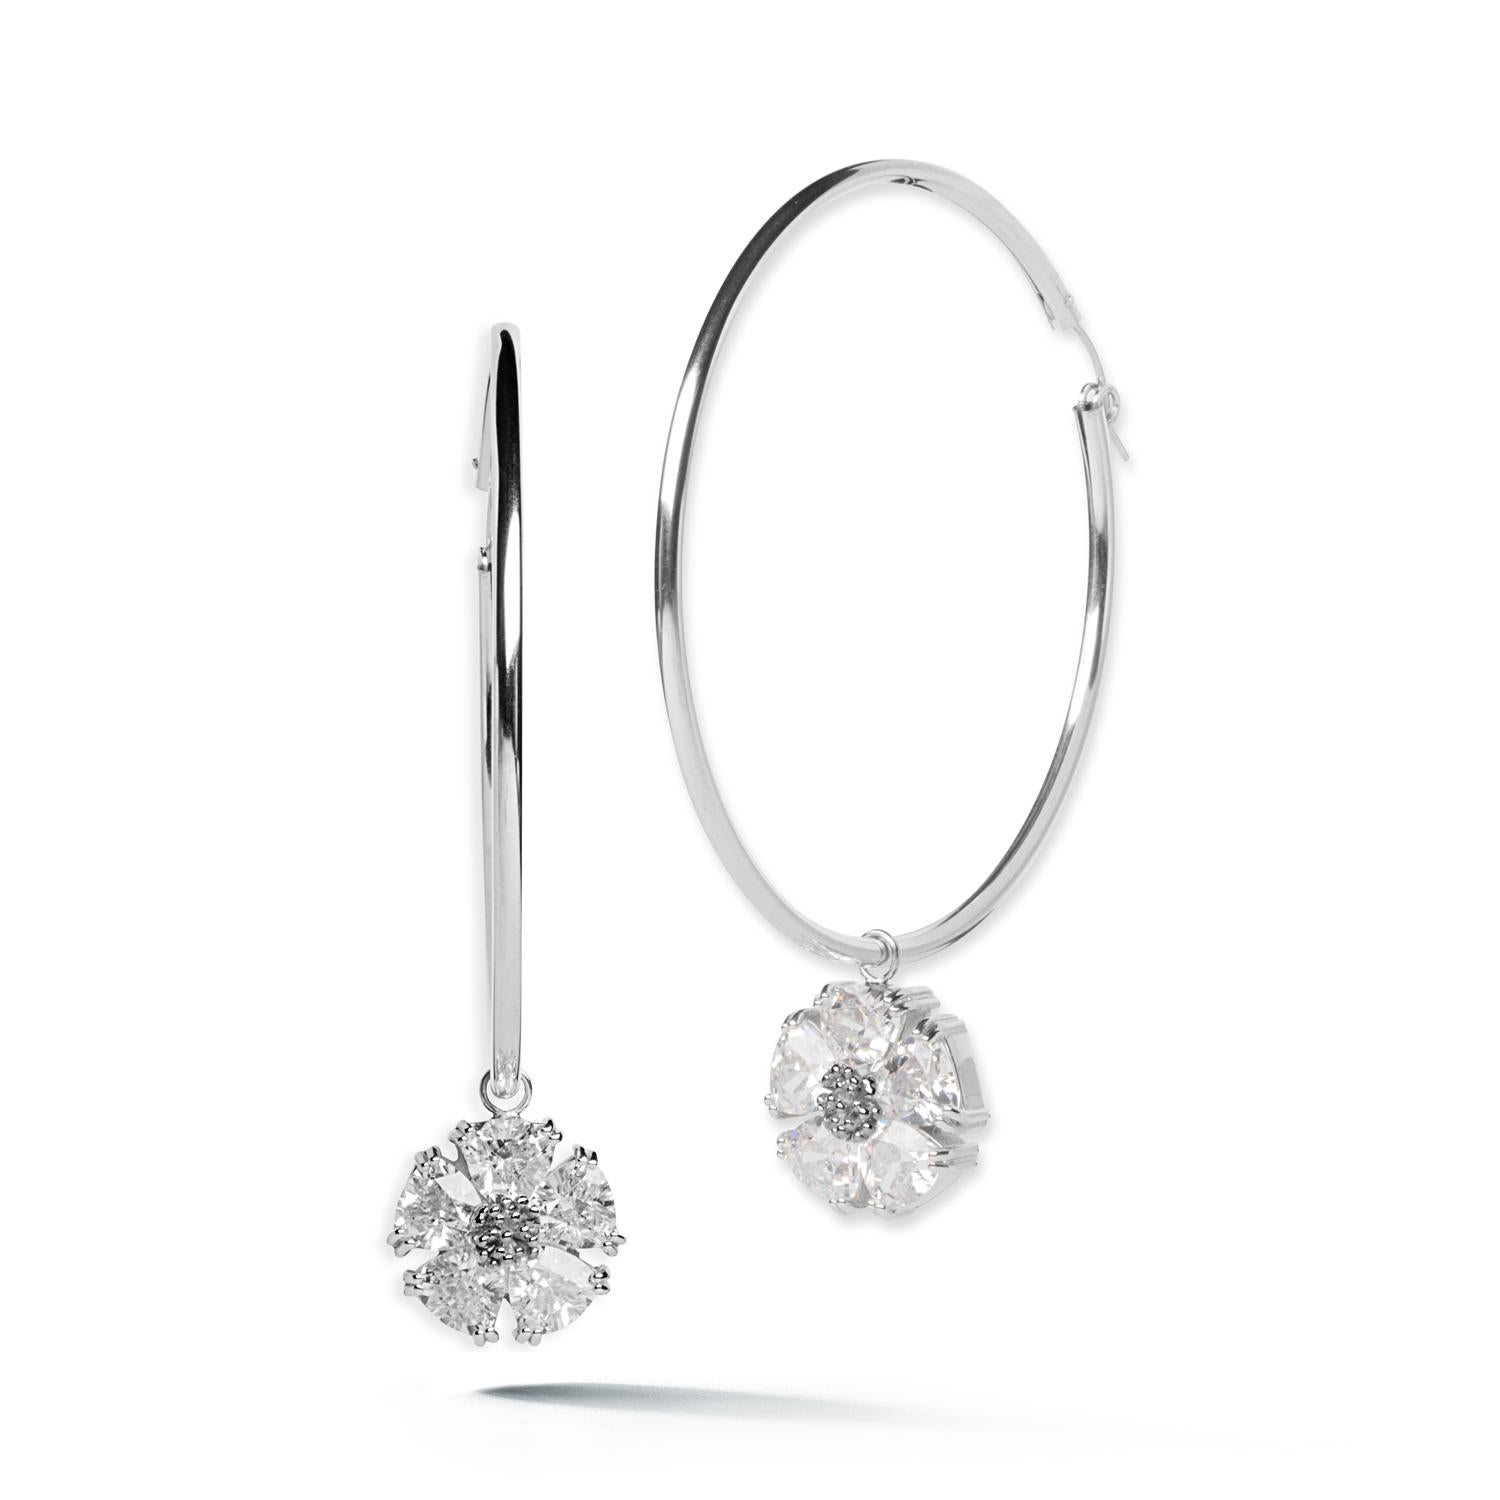 Designed in NYC

.925 Sterling Silver 10 x 7 mm Black Sapphire Blossom Stone Dangle Hoops. No matter the season, allow natural beauty to surround you wherever you go. Blossom stone dangle hoops: 

	Sterling silver 
	High-polish finish
	Light-weight